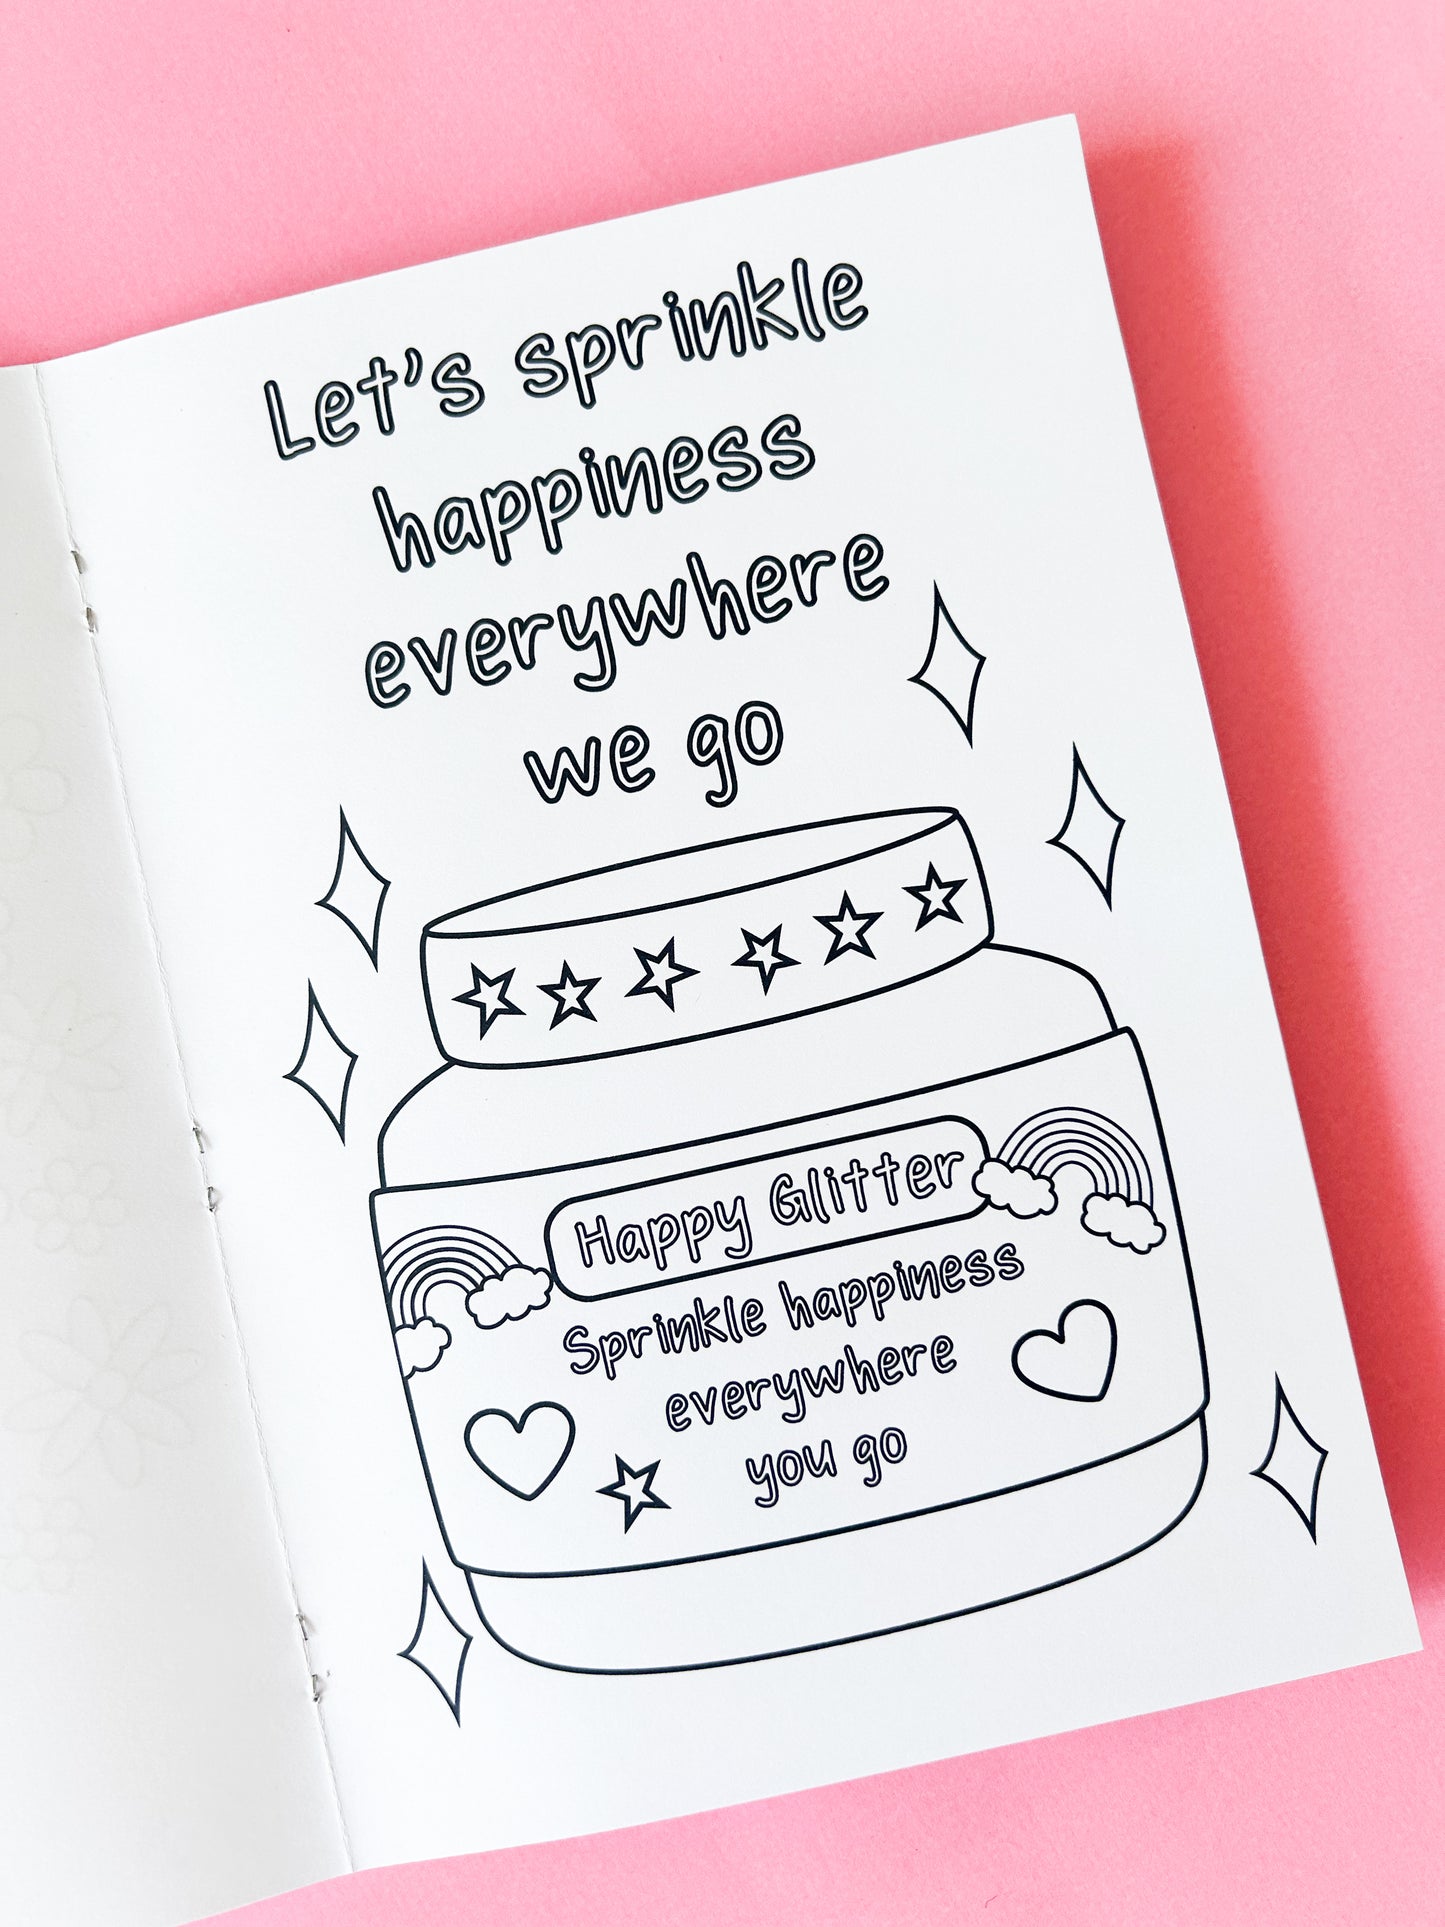 Super Second - Happiness Affirmations Colouring book